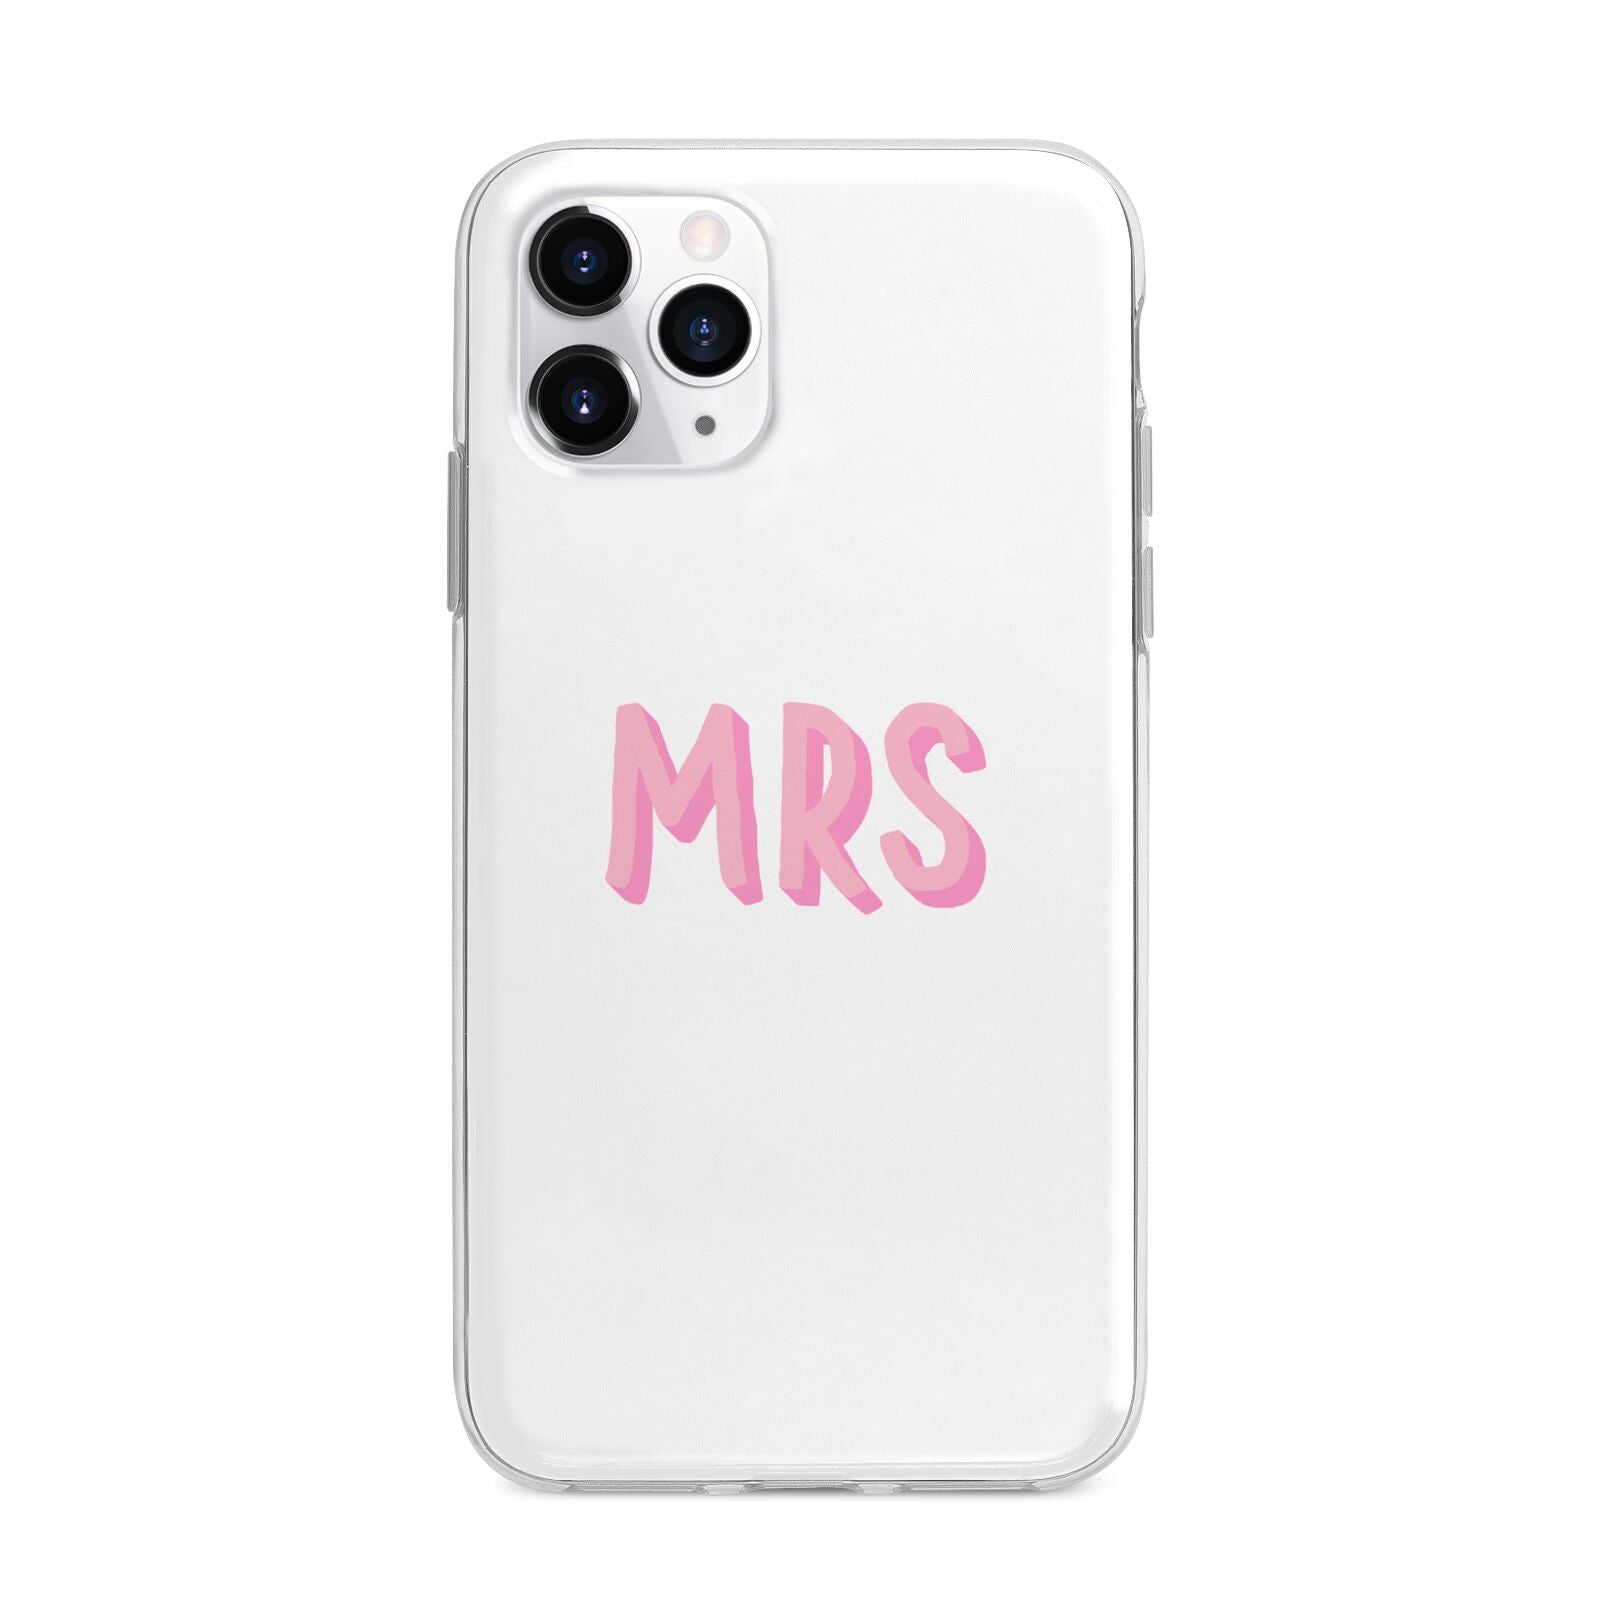 Mrs Apple iPhone 11 Pro Max in Silver with Bumper Case